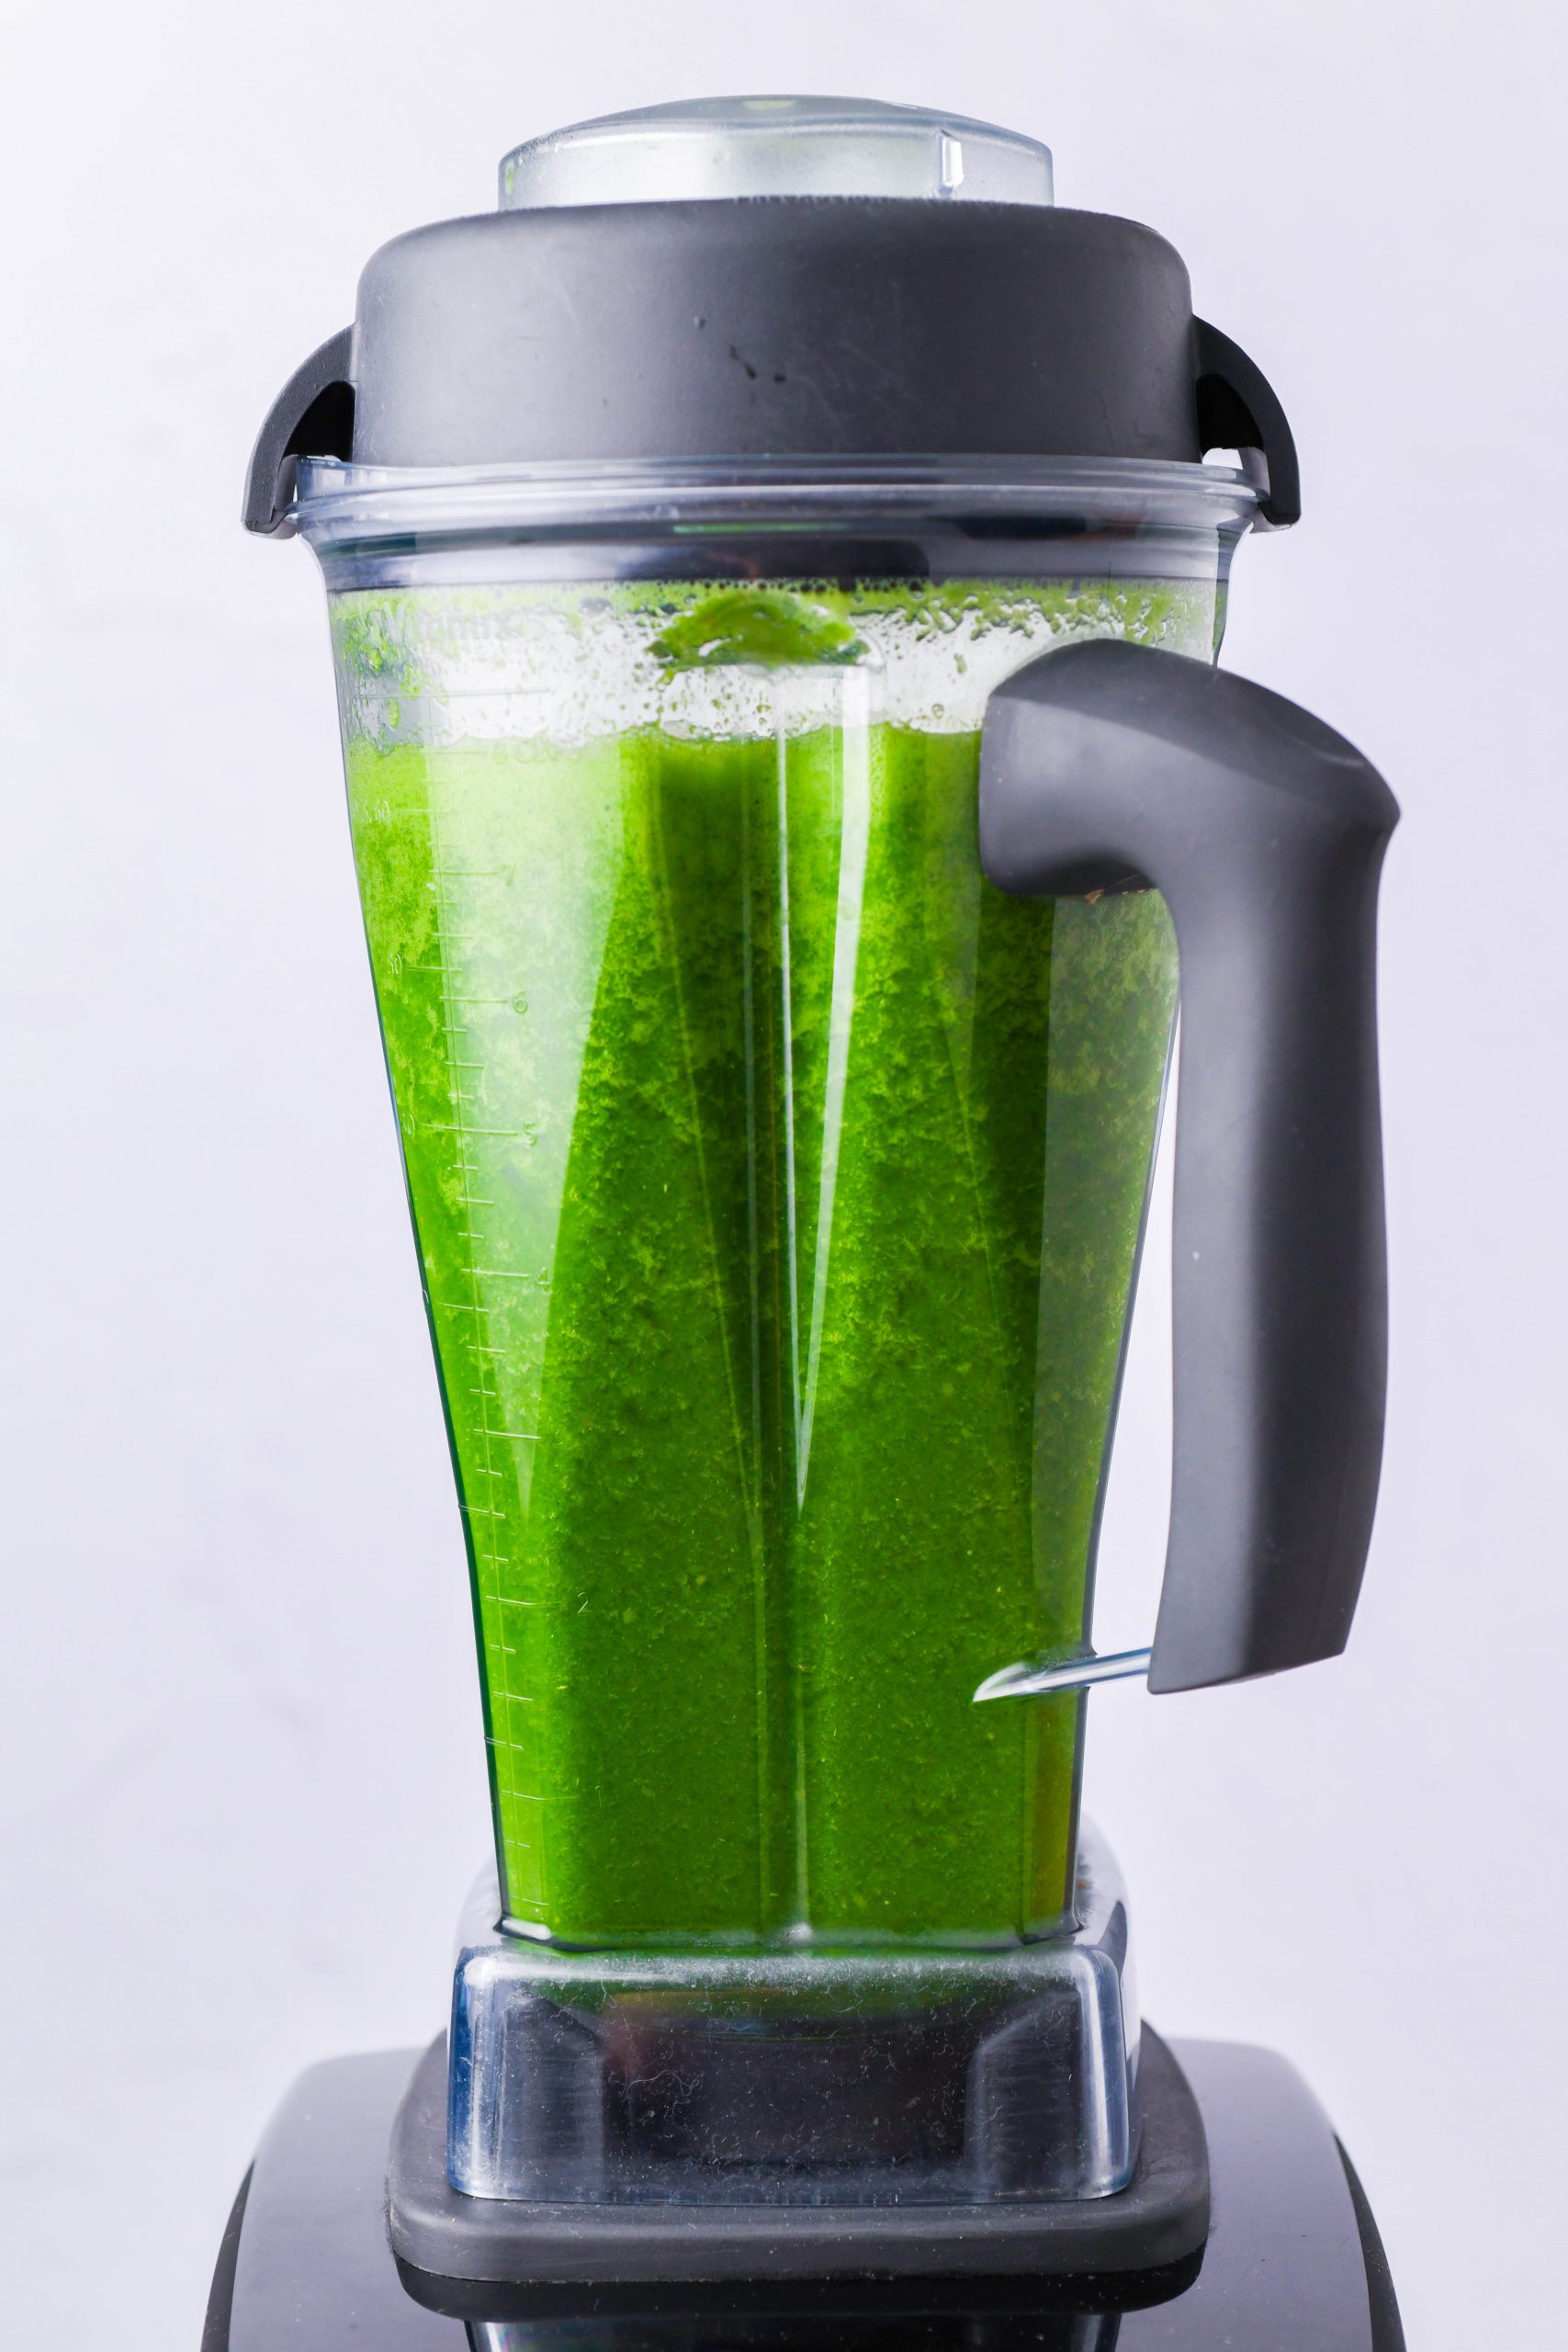 Had undulate Æsel Green Juice in a Blender {vegan + gf} - Without a juicer!